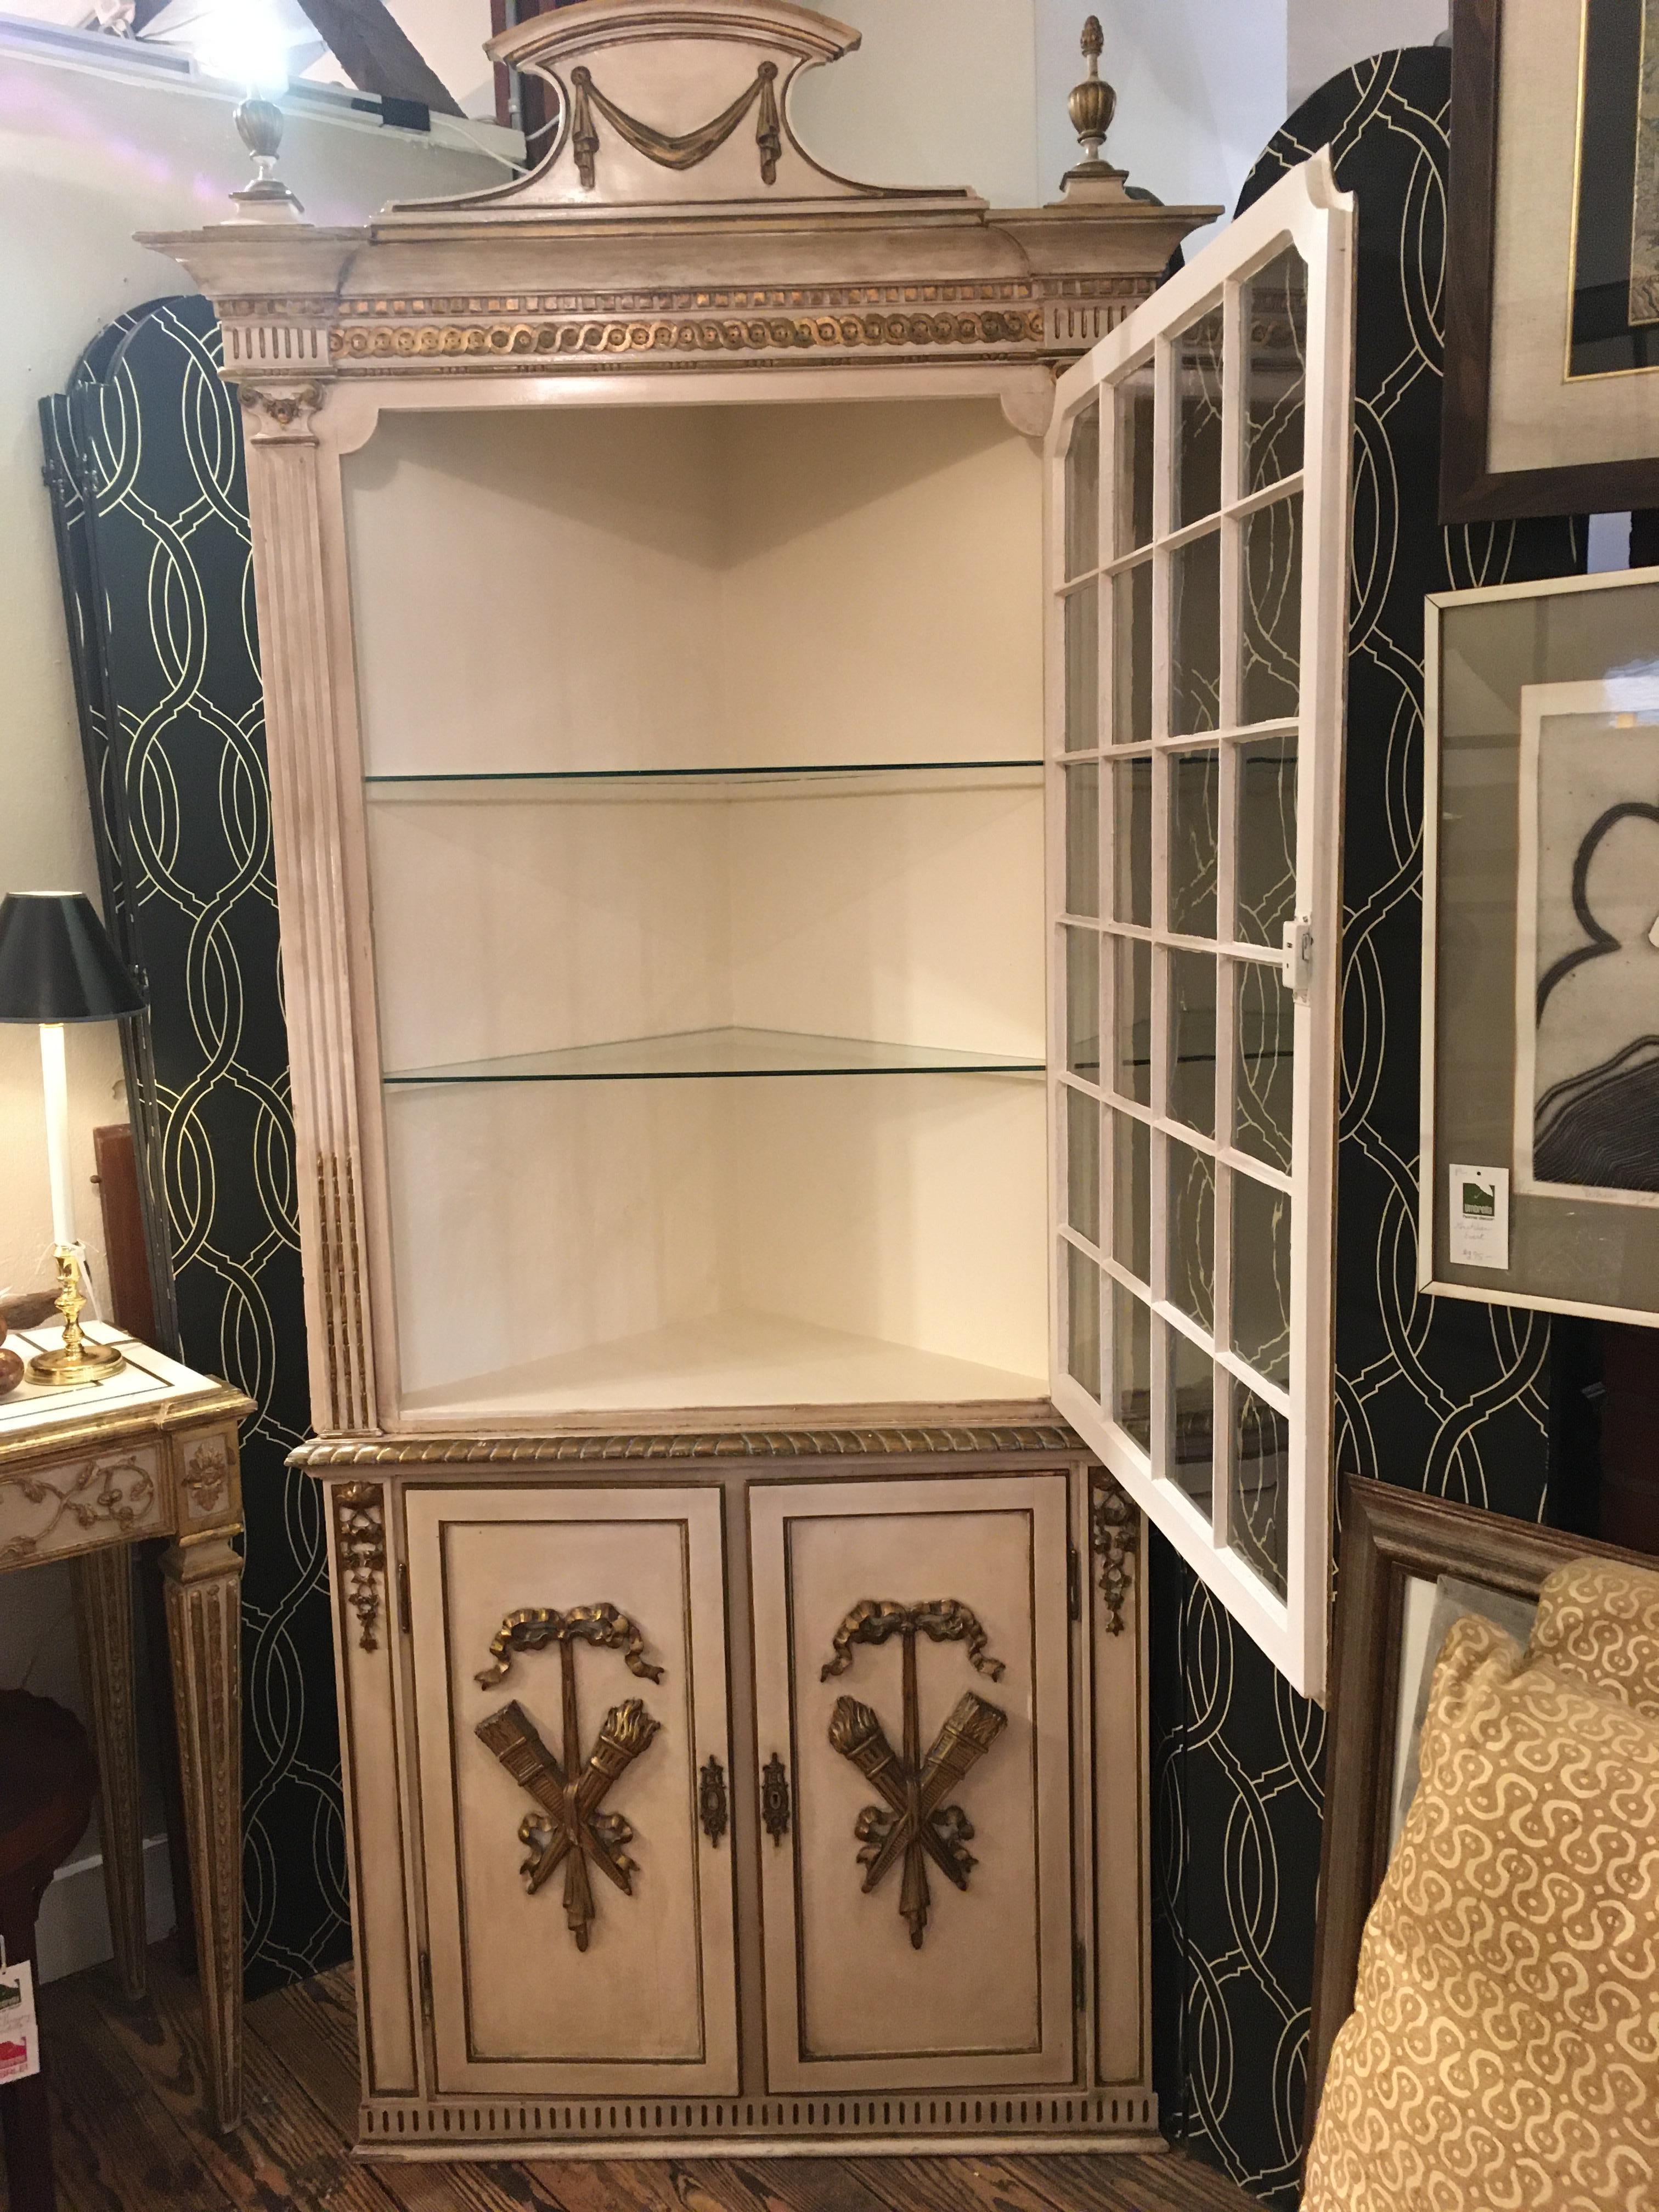 A glamorous French antique carved wood corner cupboard painted a creamy white having giltwood embellishments including swag and finials at the top and torches with bows on the panel doors below. Original glass is in the top single door that opens to